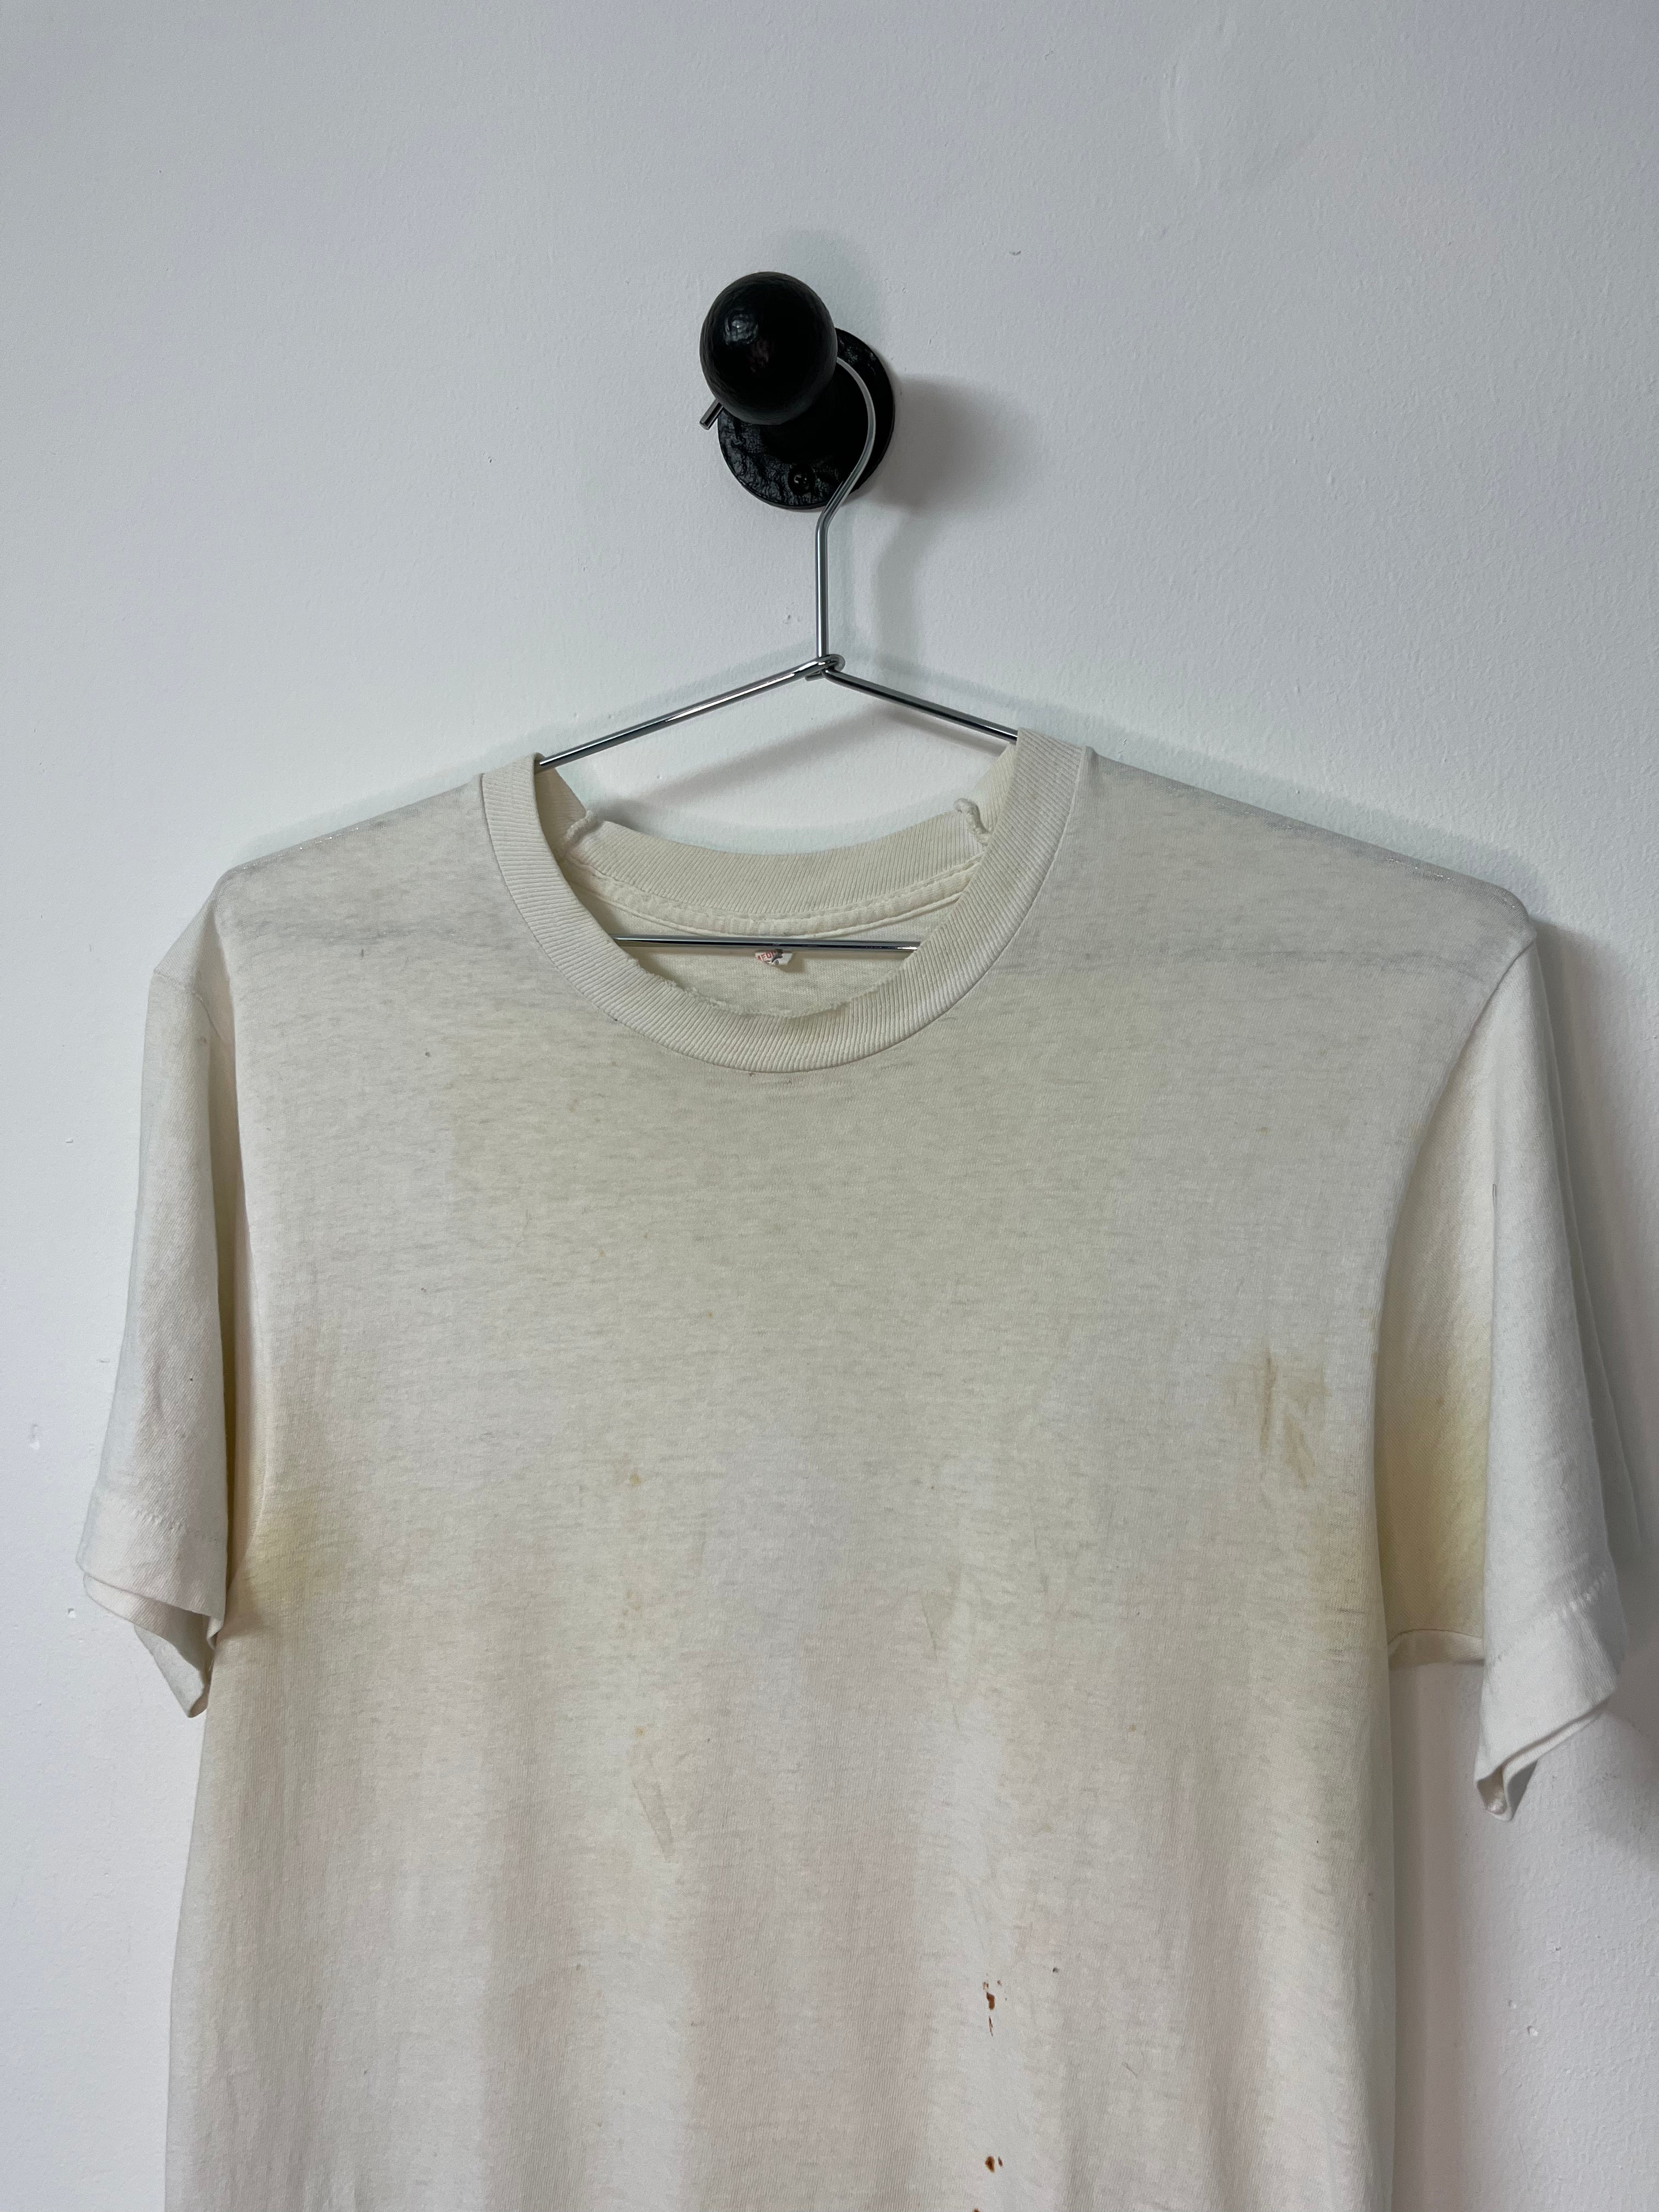 70’s Distressed Blank White T-Shirt - Aged White with Slight Discoloration - M/L Long